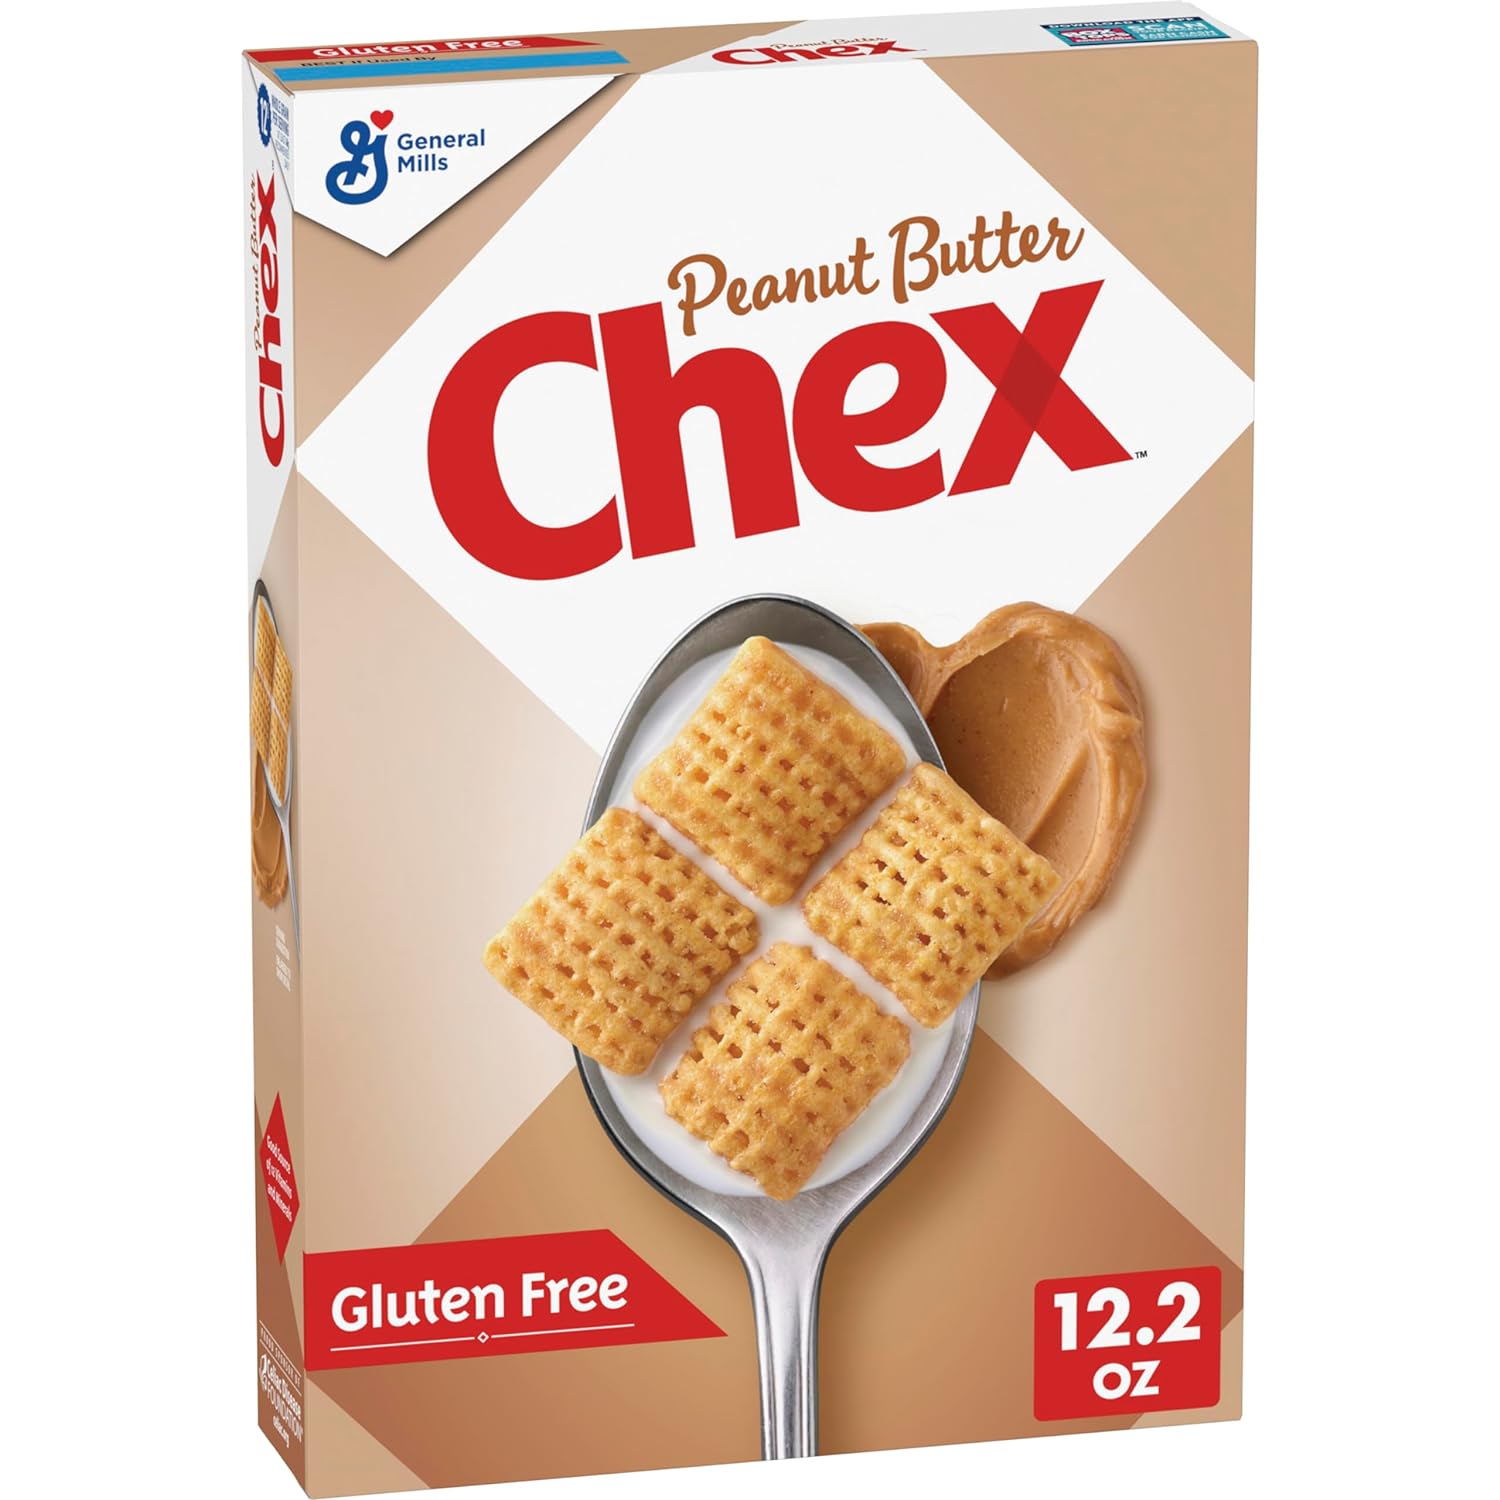 Peanut Butter Chex Cereal, Gluten Free Breakfast Cereal, Made with Whole Grain, 12.2 oz